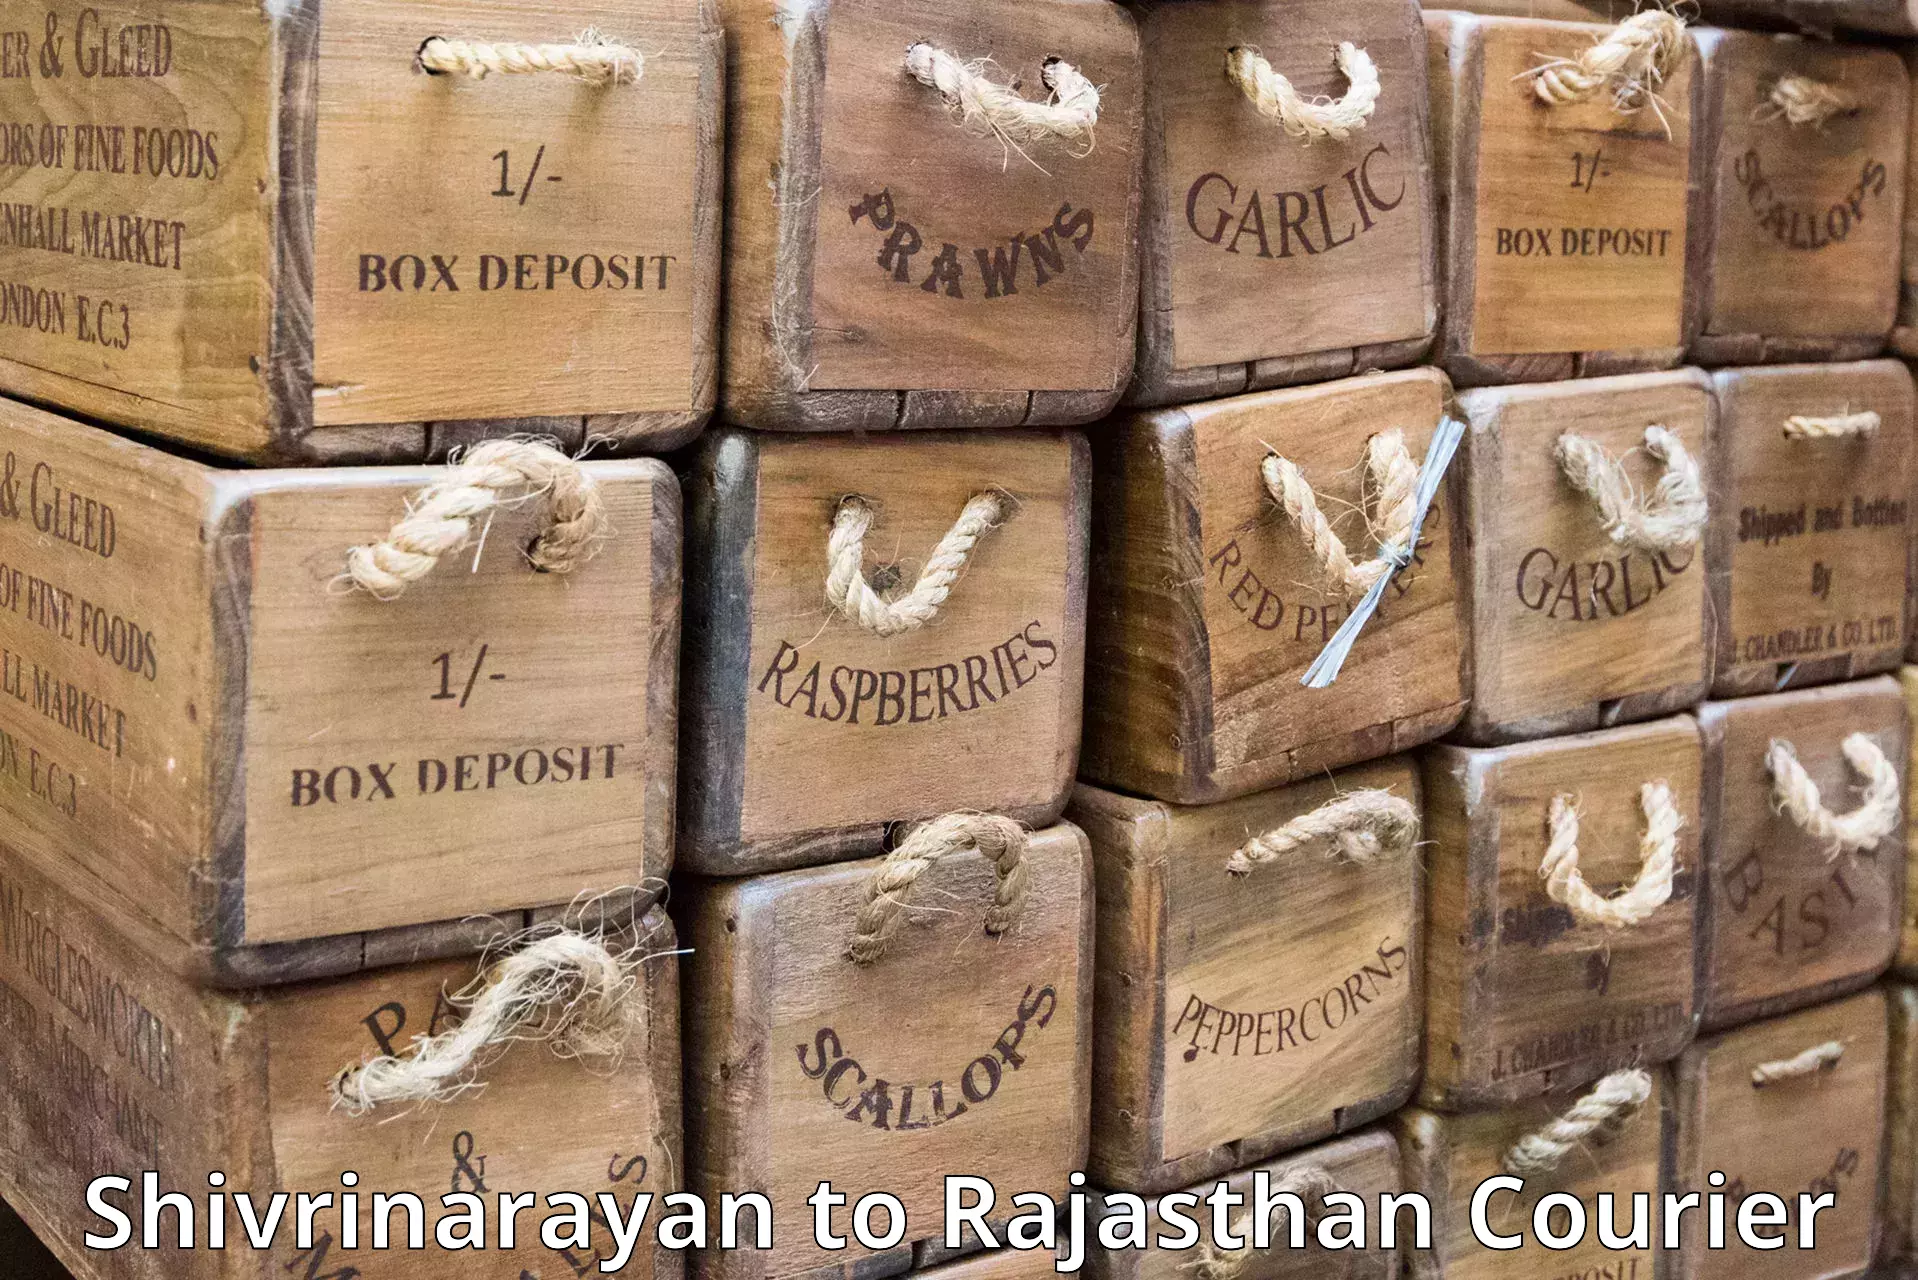 Efficient parcel service Shivrinarayan to Yeswanthapur